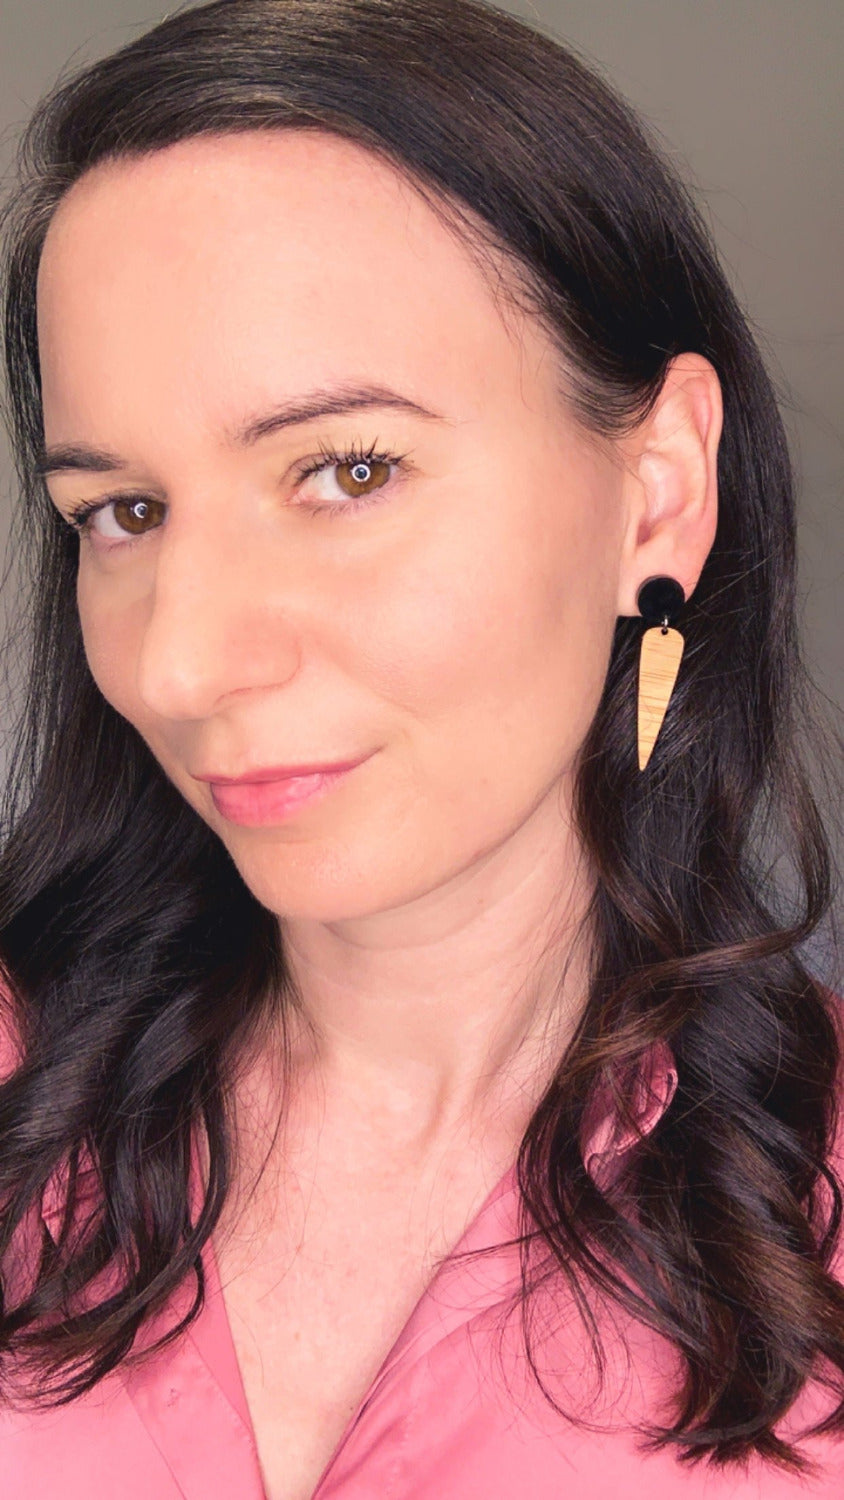 Simple, black and bamboo earrings